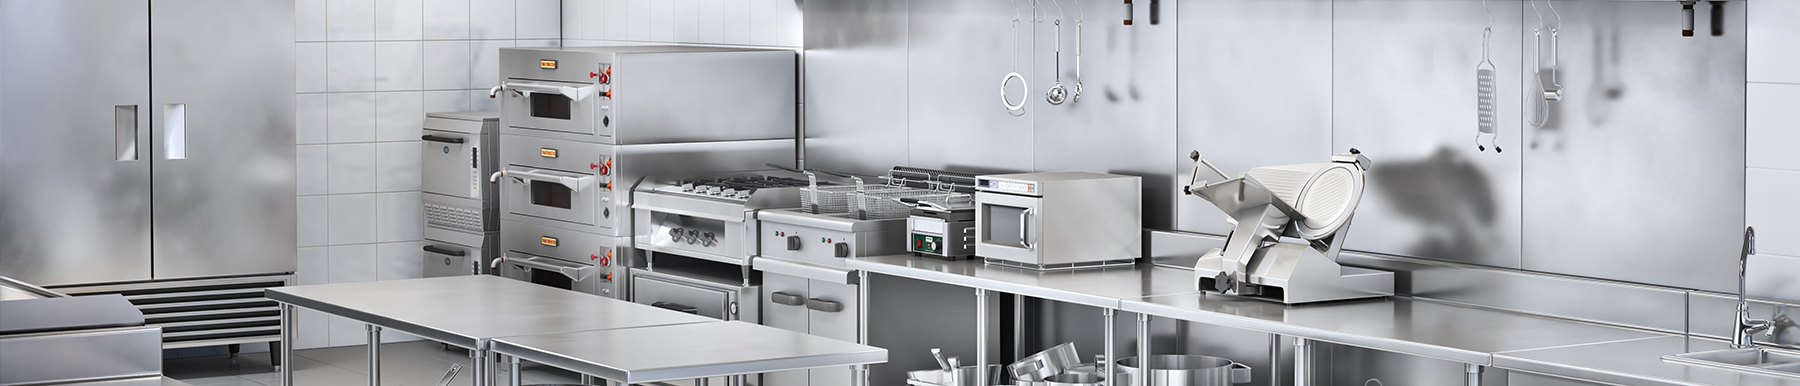 Catering Equipment Suppliers Near Amber Valley | H2 Catering Equipment Catering Equipment